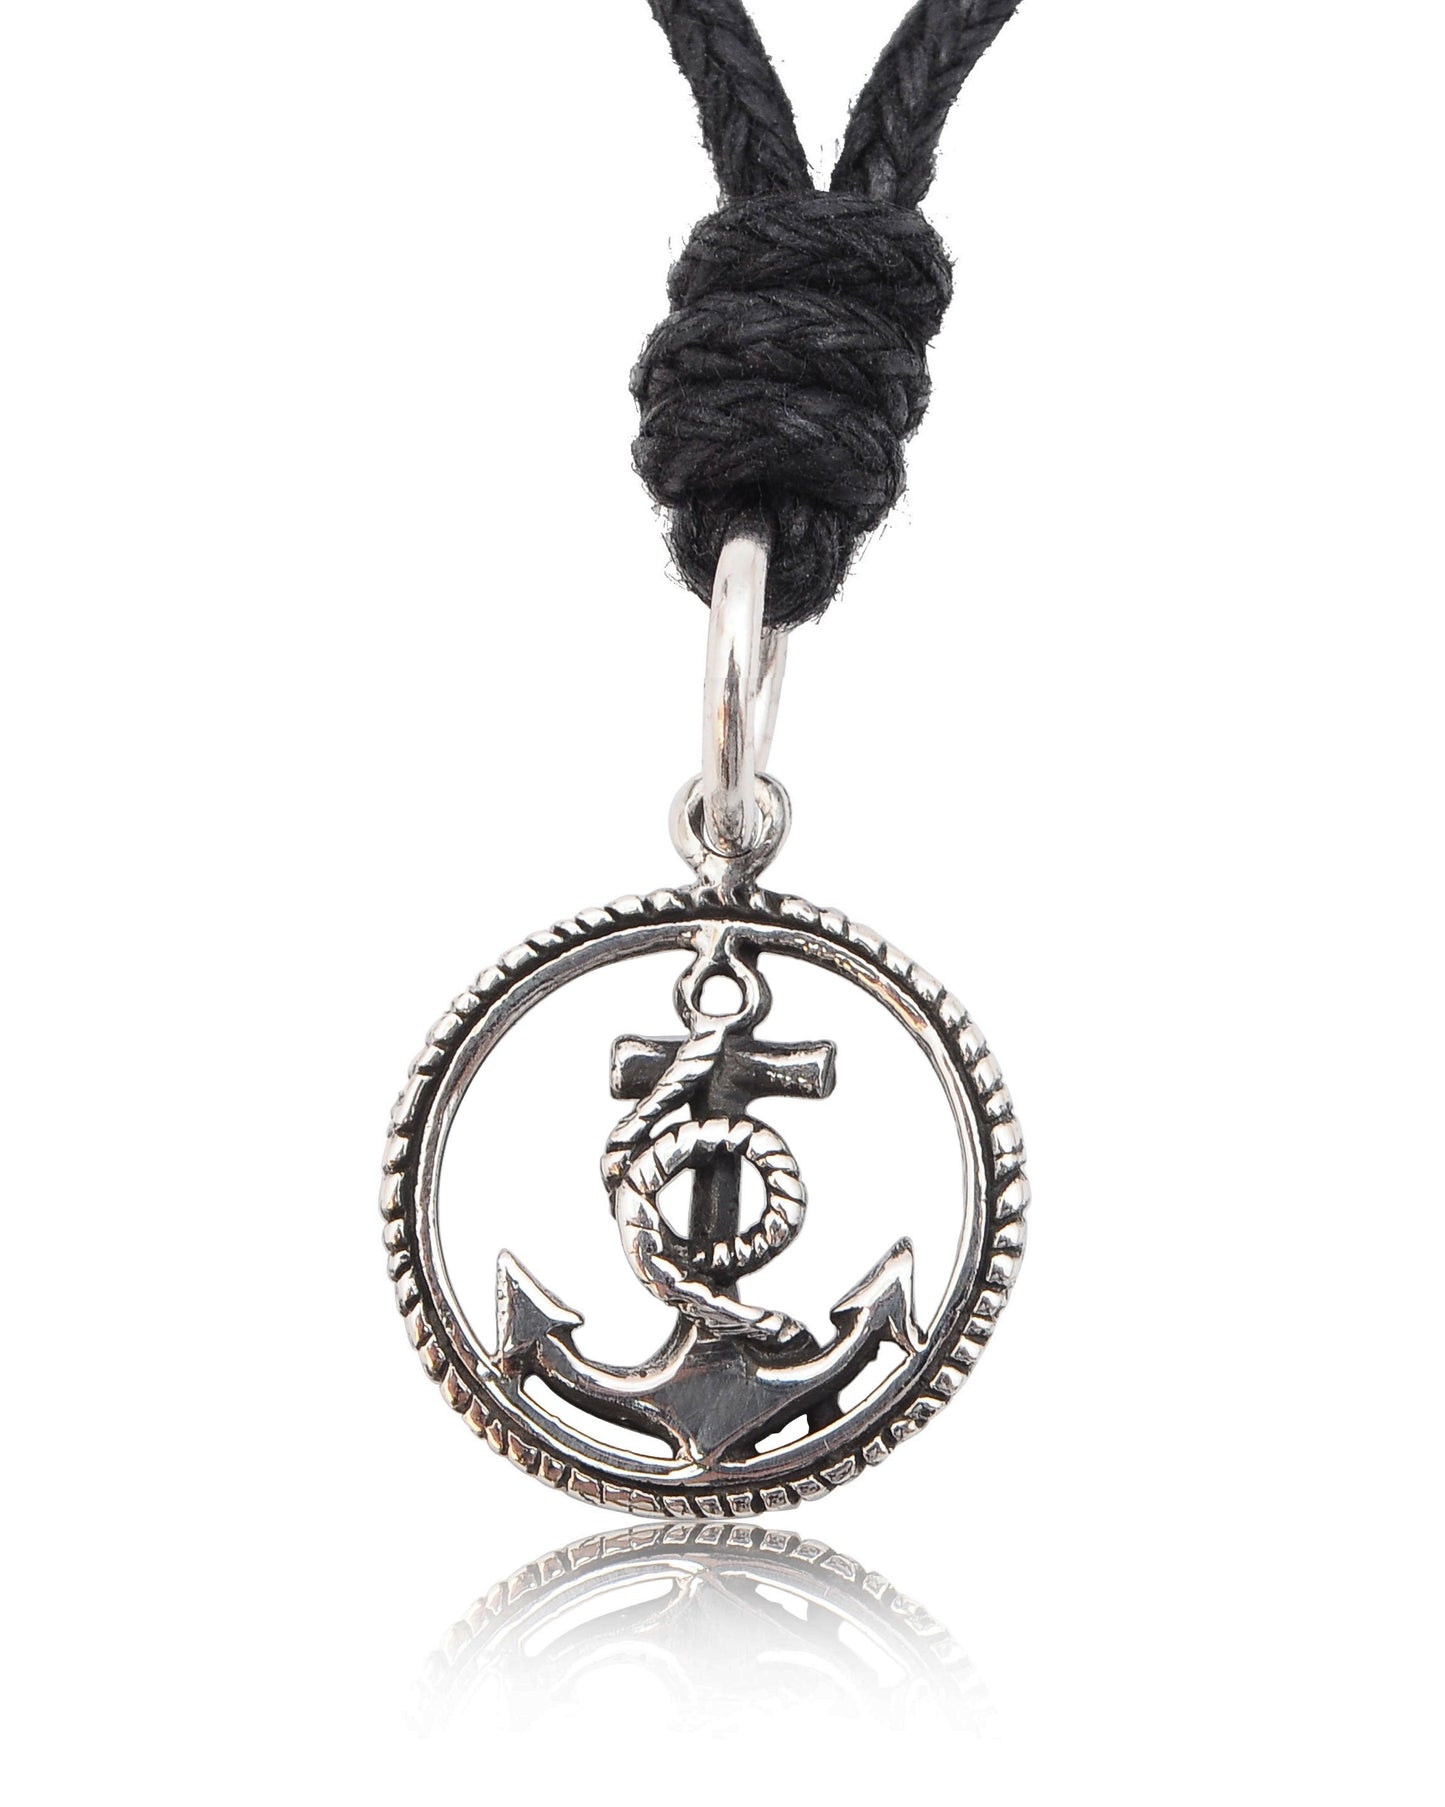 Ship Anchor Boat Pewer Sterling-silver Brass Charm Necklace Pendant Jewelry